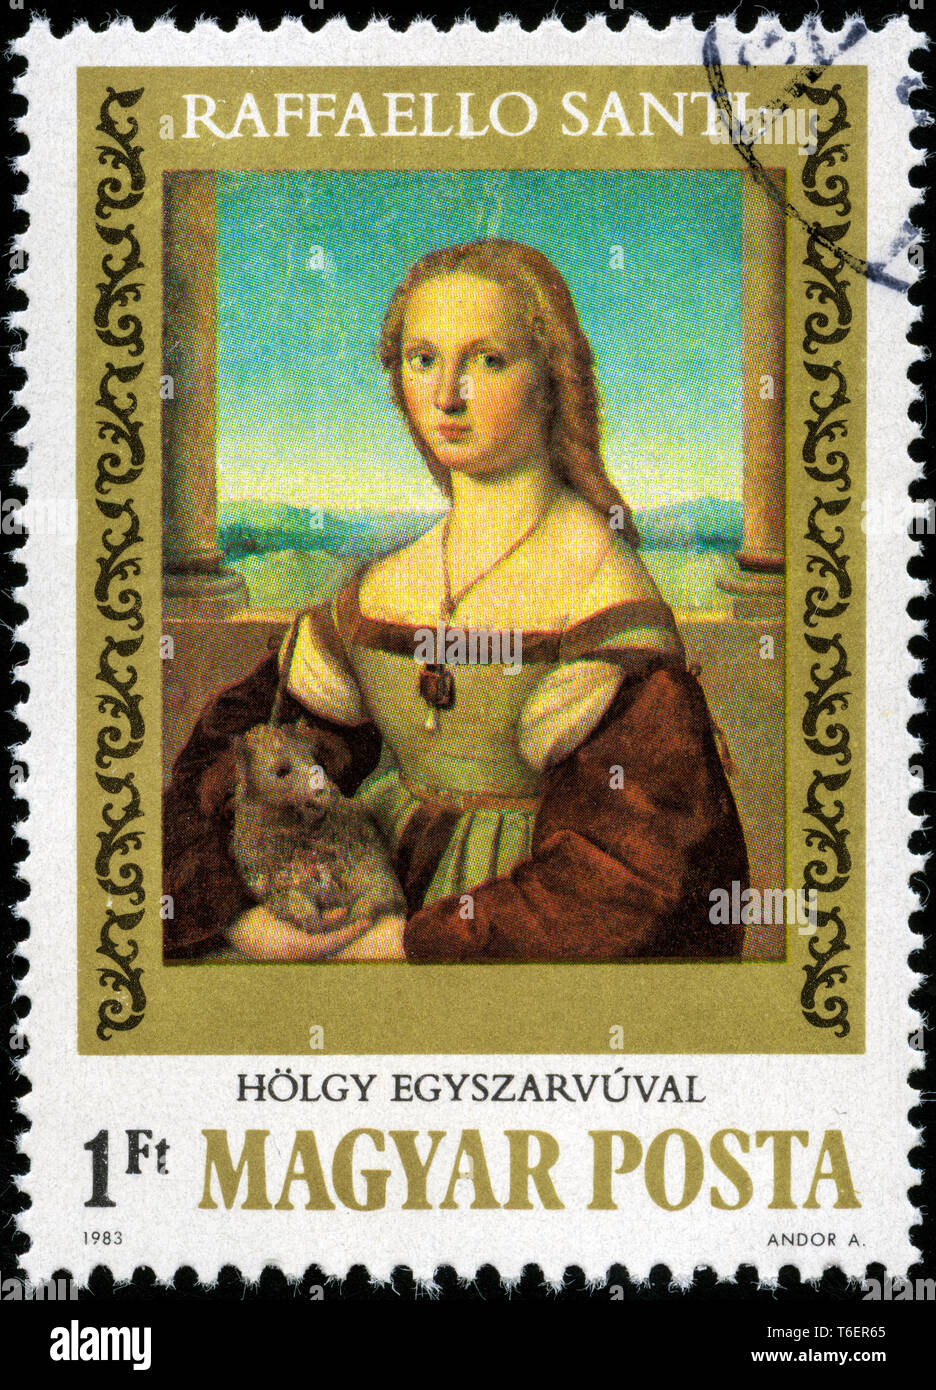 Postage stamp from Hungary in the Paintings by Raffaello Santi series issued in 1983 Stock Photo